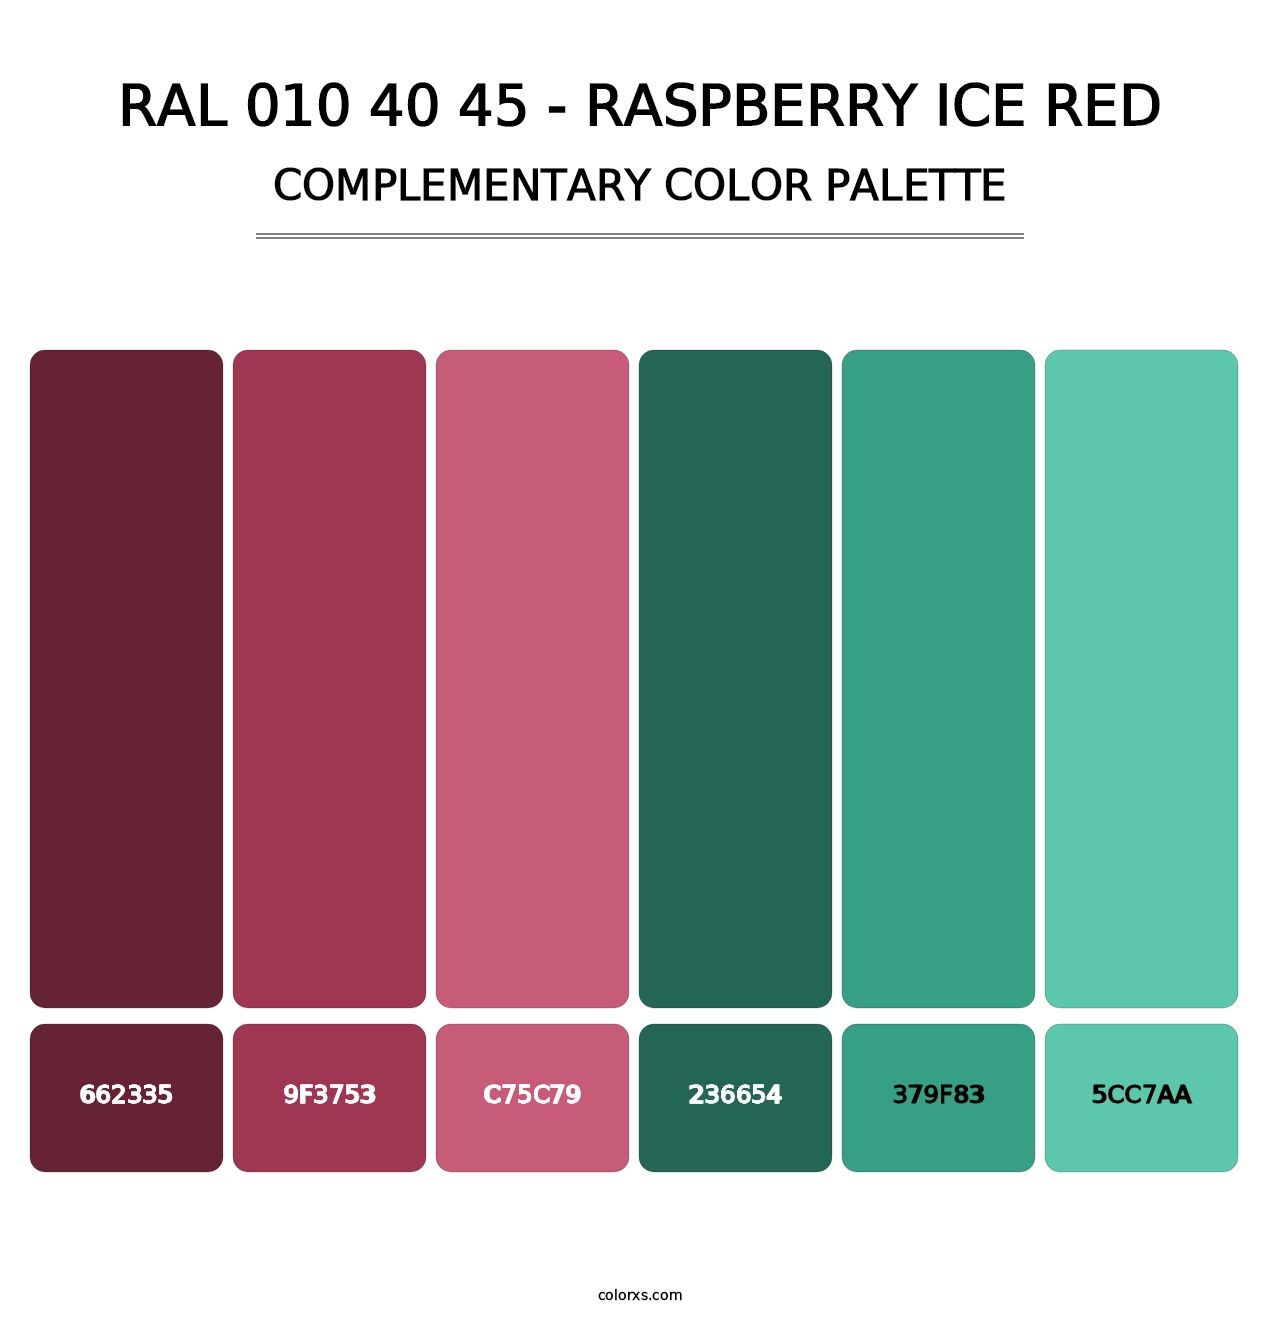 RAL 010 40 45 - Raspberry Ice Red - Complementary Color Palette